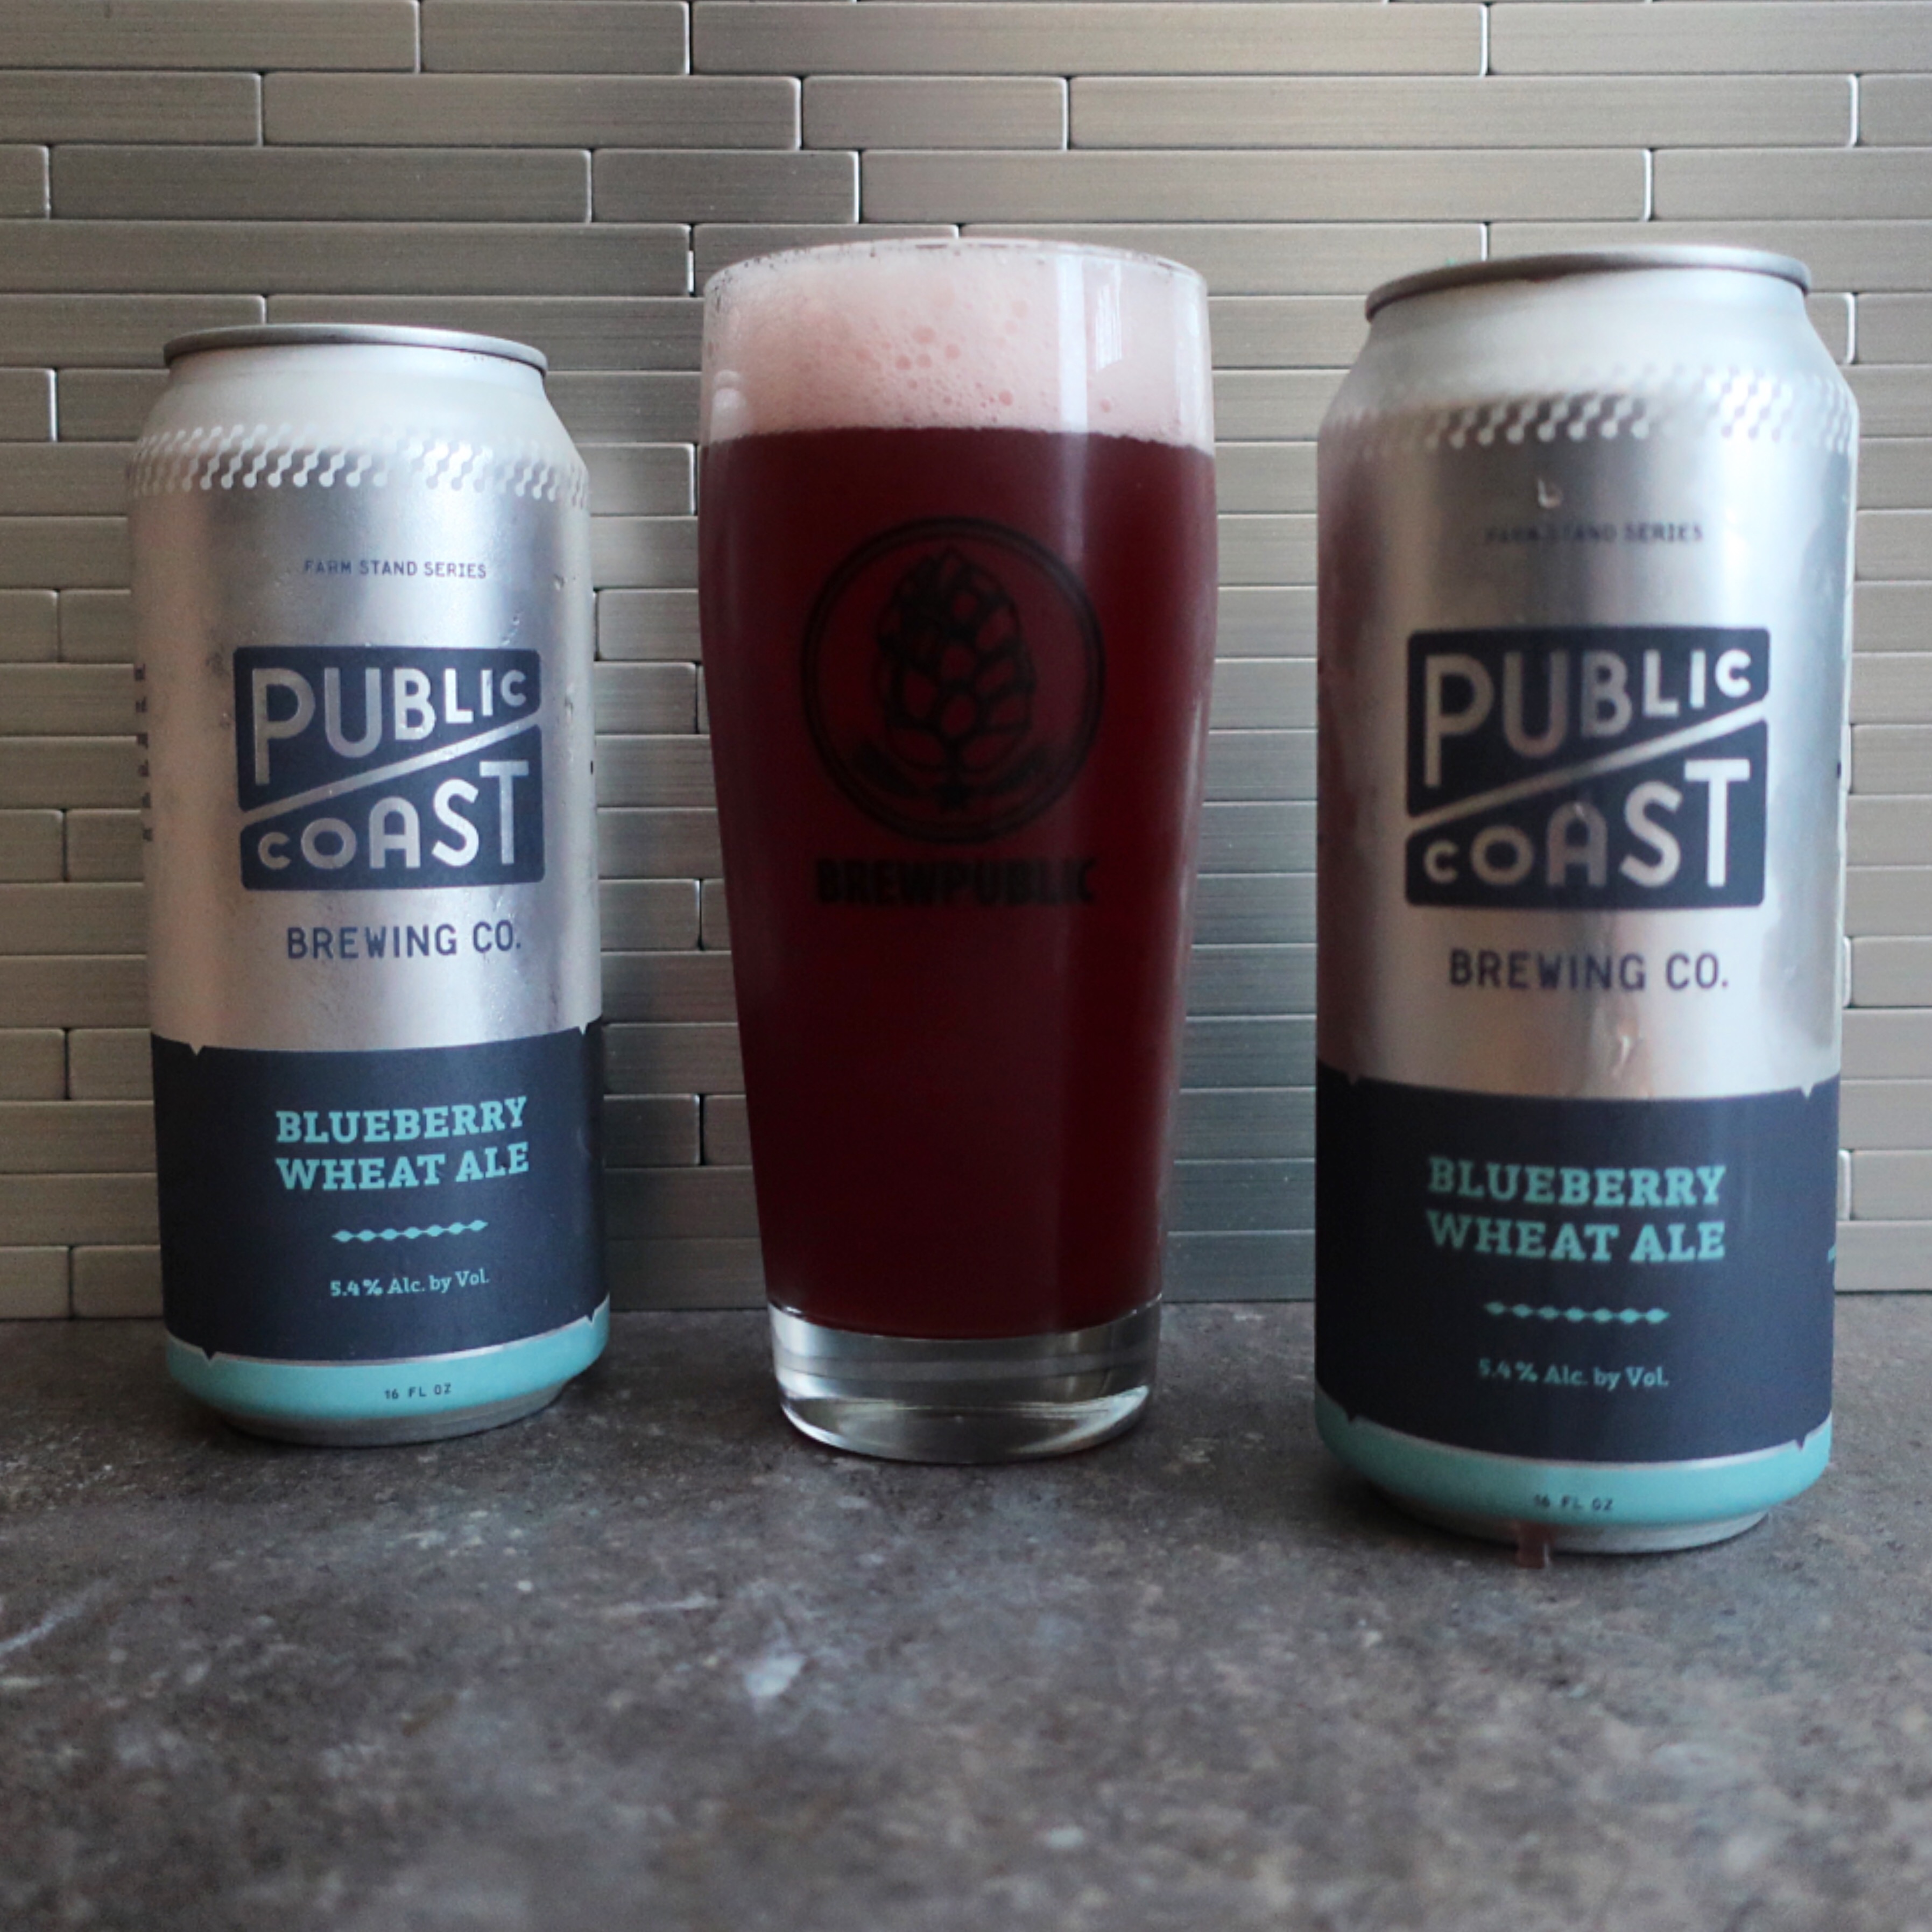 A glass pour of the new Public Coast Brewing Blueberry Wheat Ale.